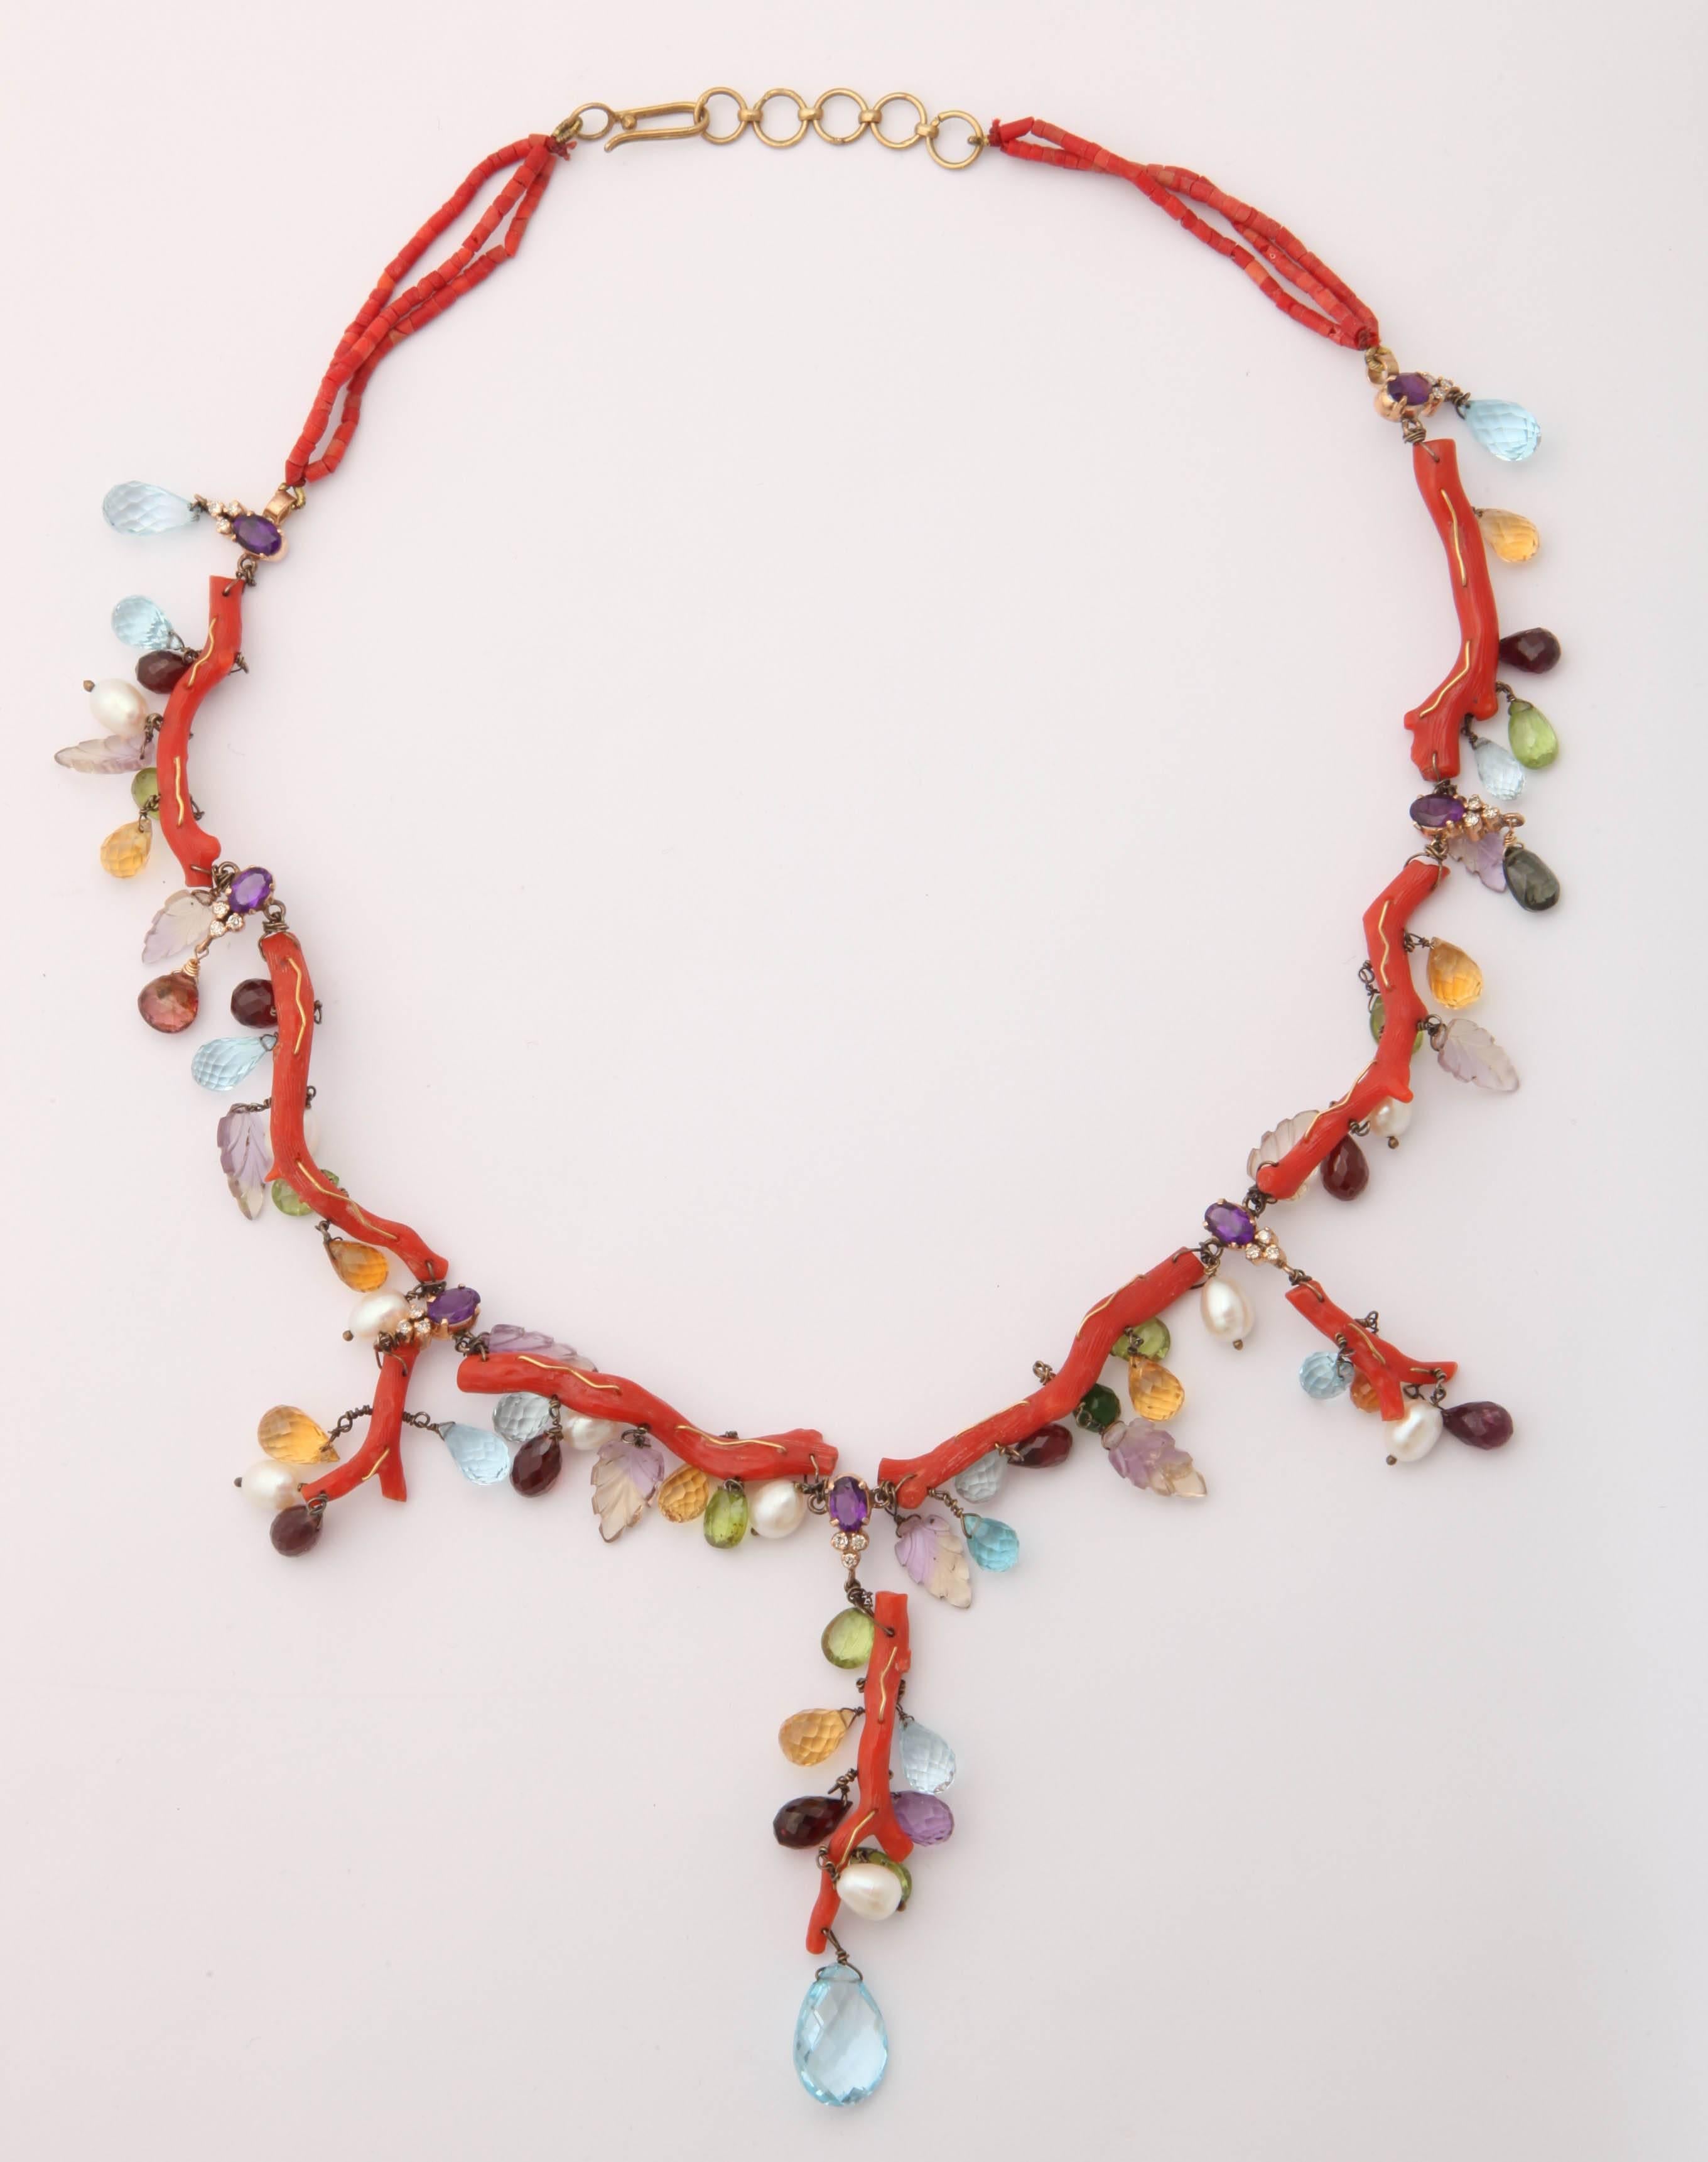 This very unusual coral necklace has everything but the kitchen sink in it. Pearls, all manner of semi precious stone, too many to list, carved leaves, faceted amethyst and diamonds. The necklace is 17 in. long and can be made longer if required.